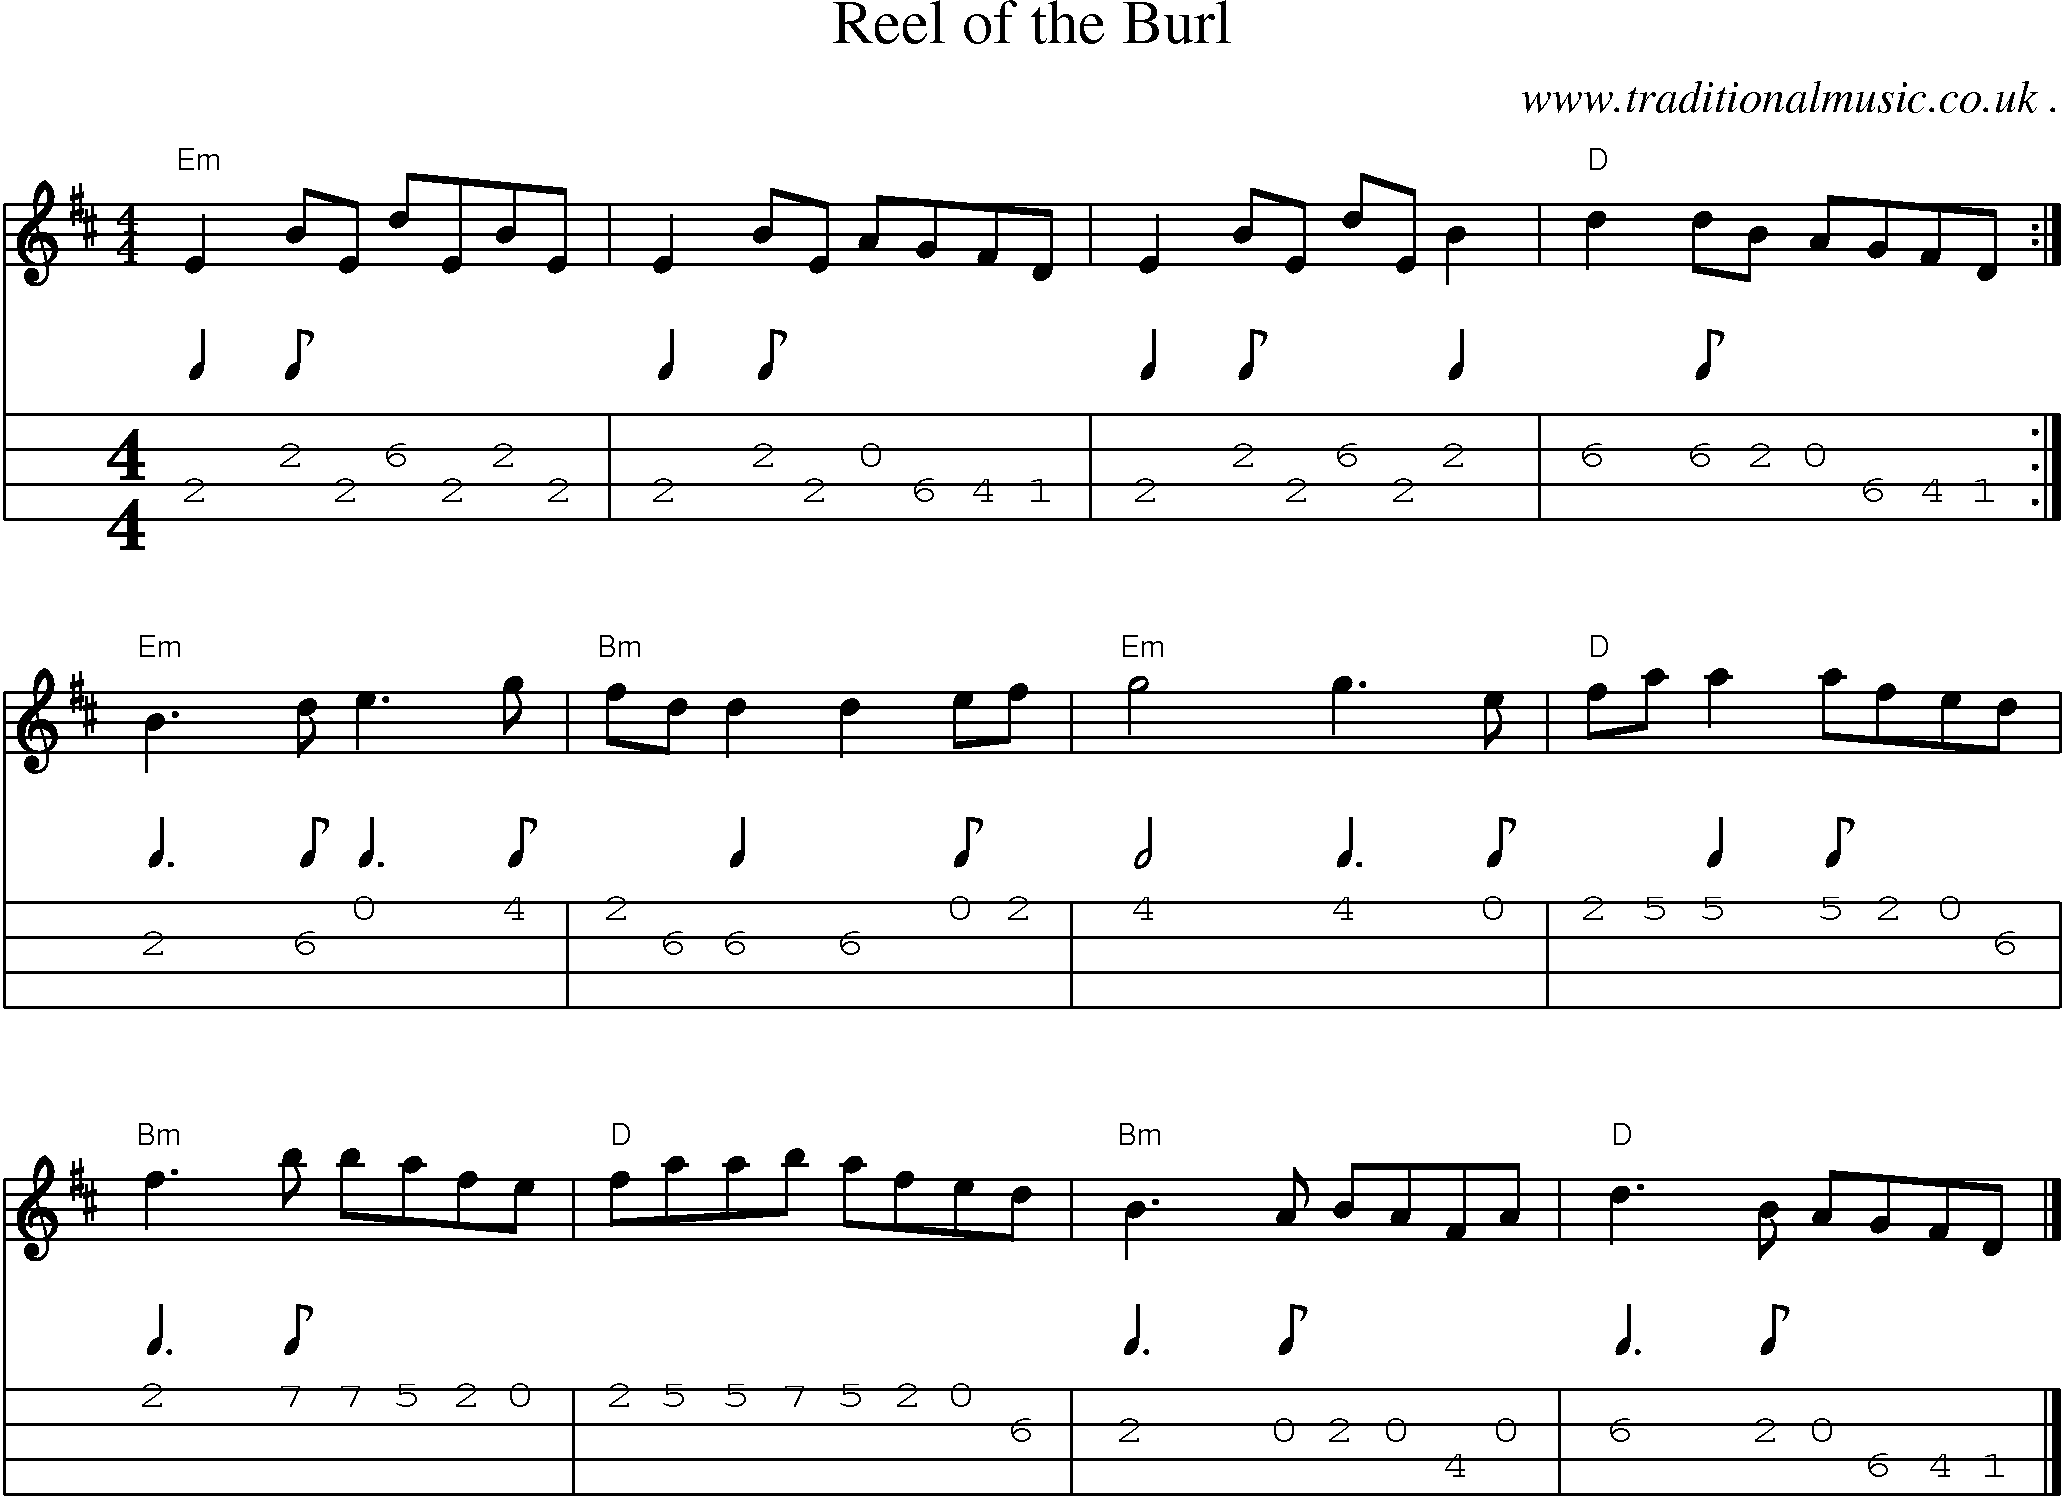 Music Score and Guitar Tabs for Reel of the Burl